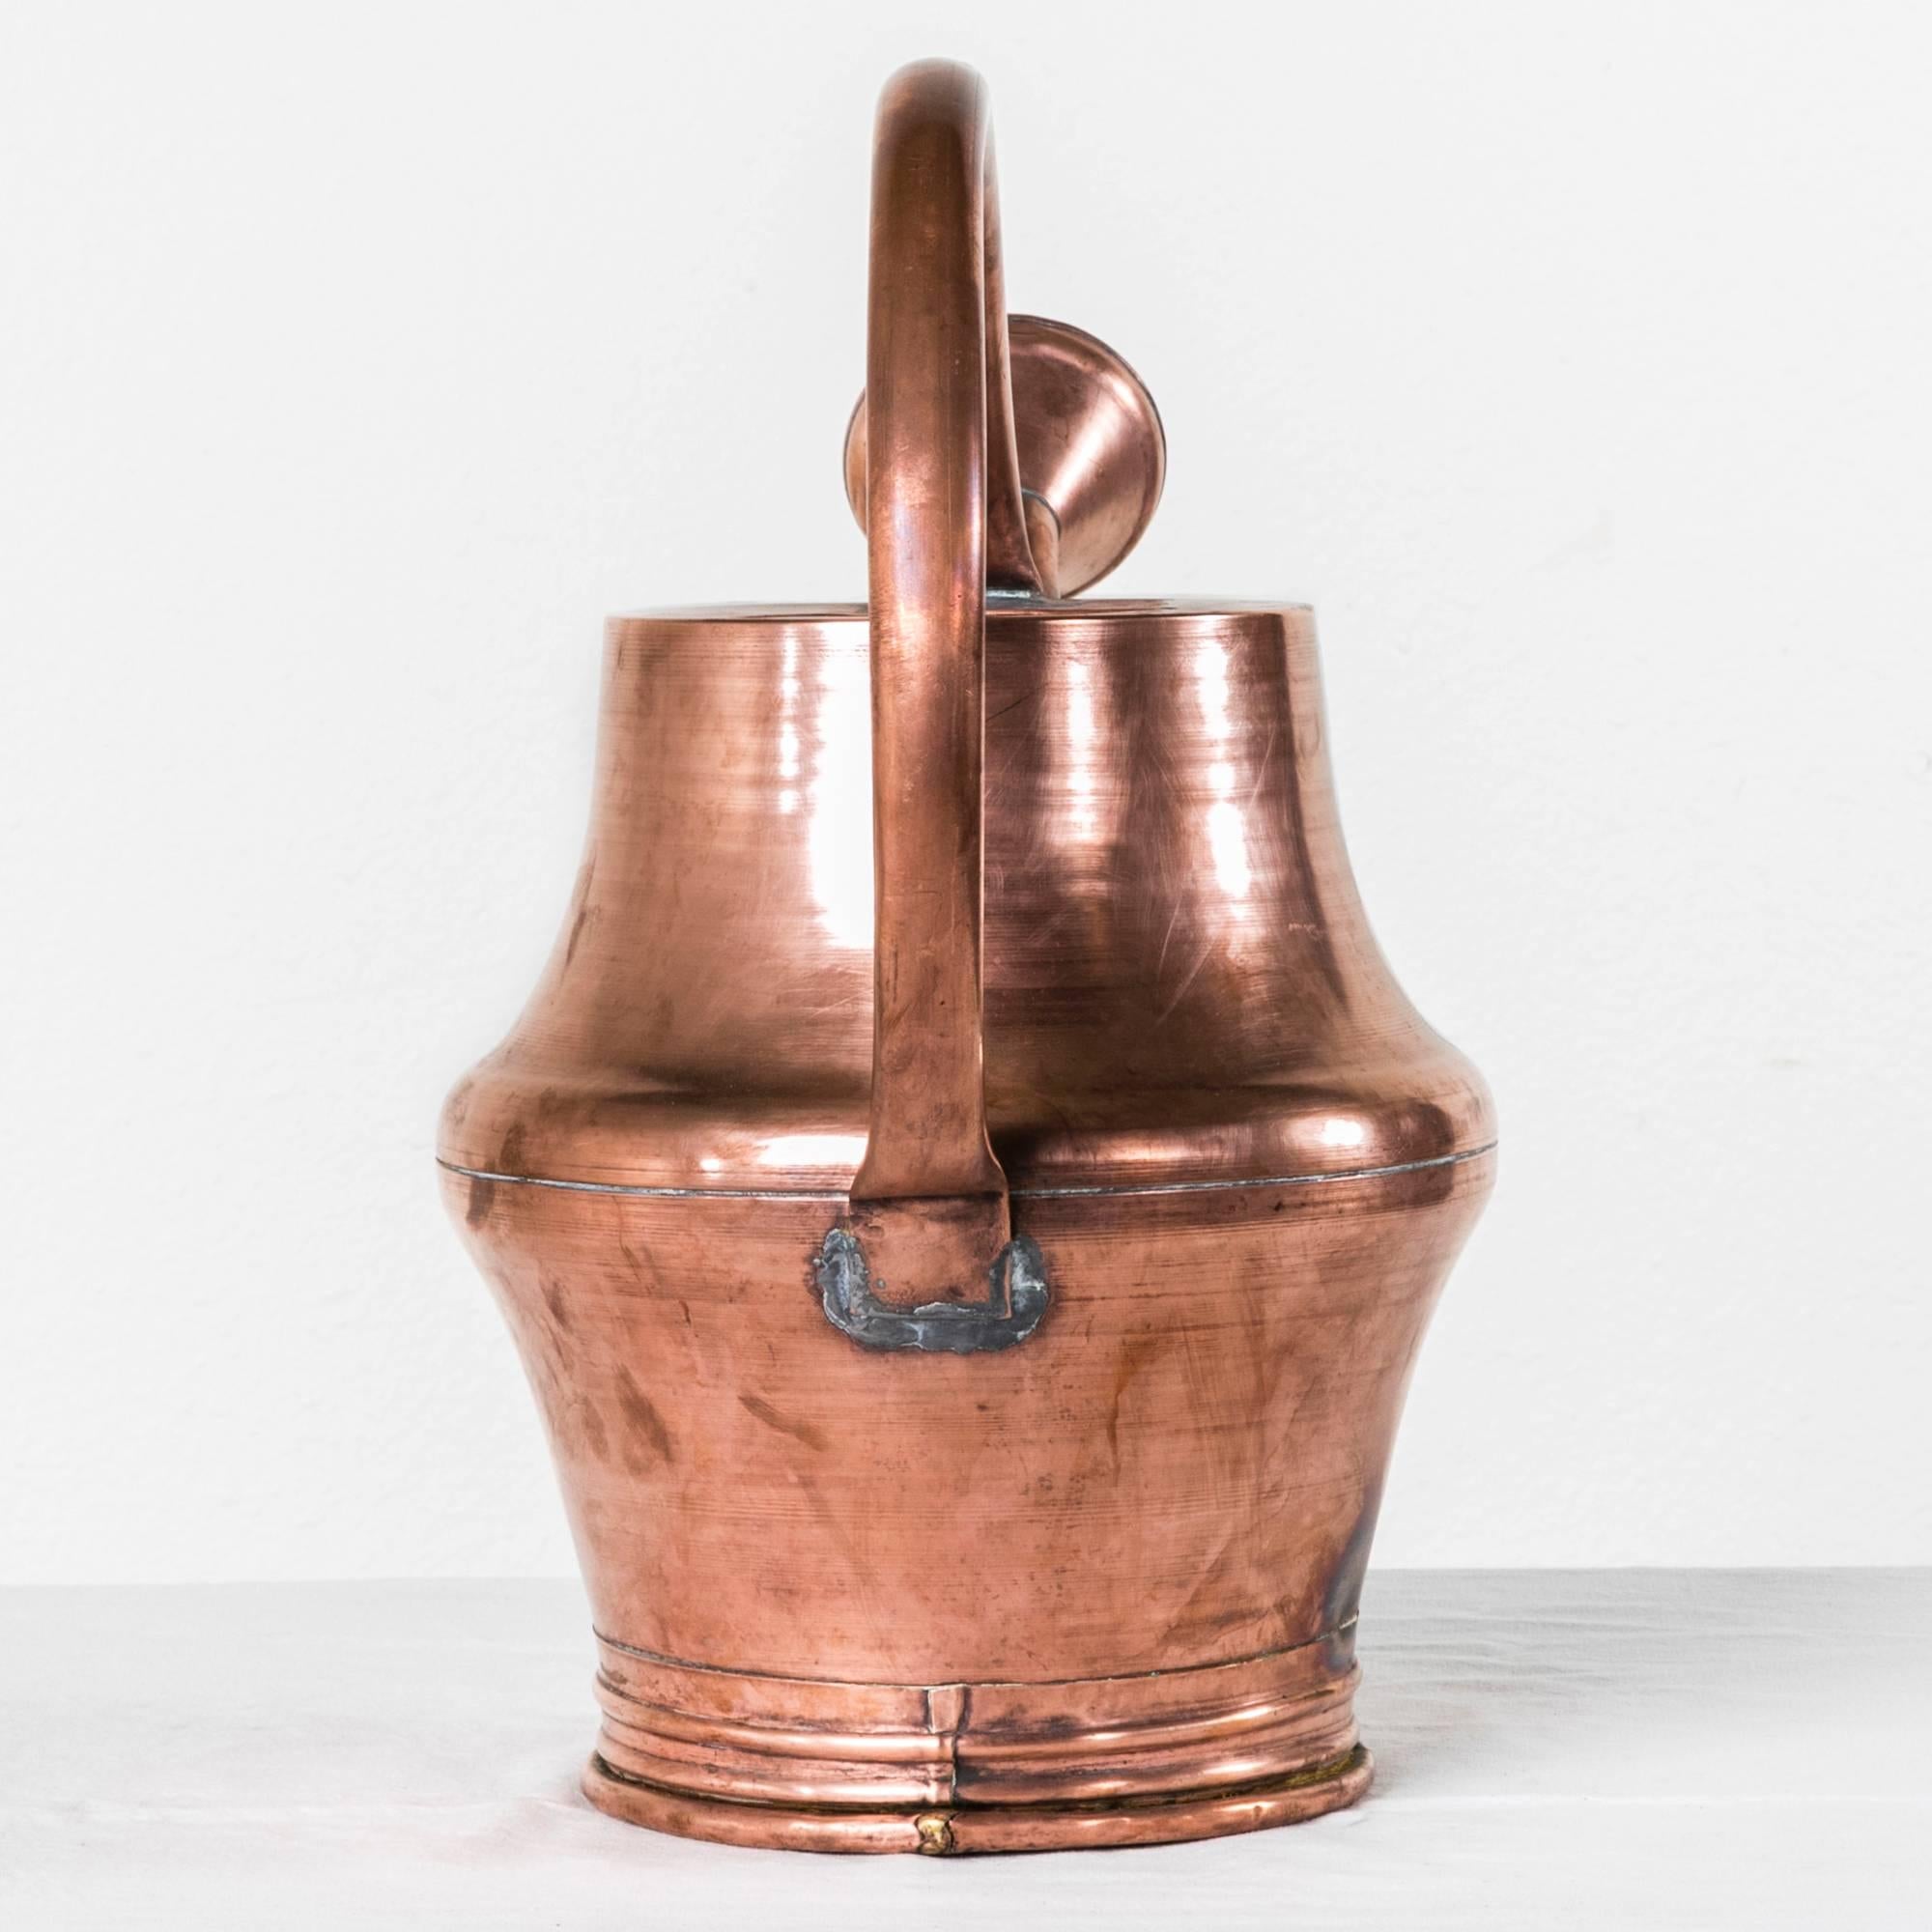 This unusually large-scale copper watering can features a unique large circular handle. Created in late 19th century France, this piece will make a stunning decorative piece for copper and gardening lovers.